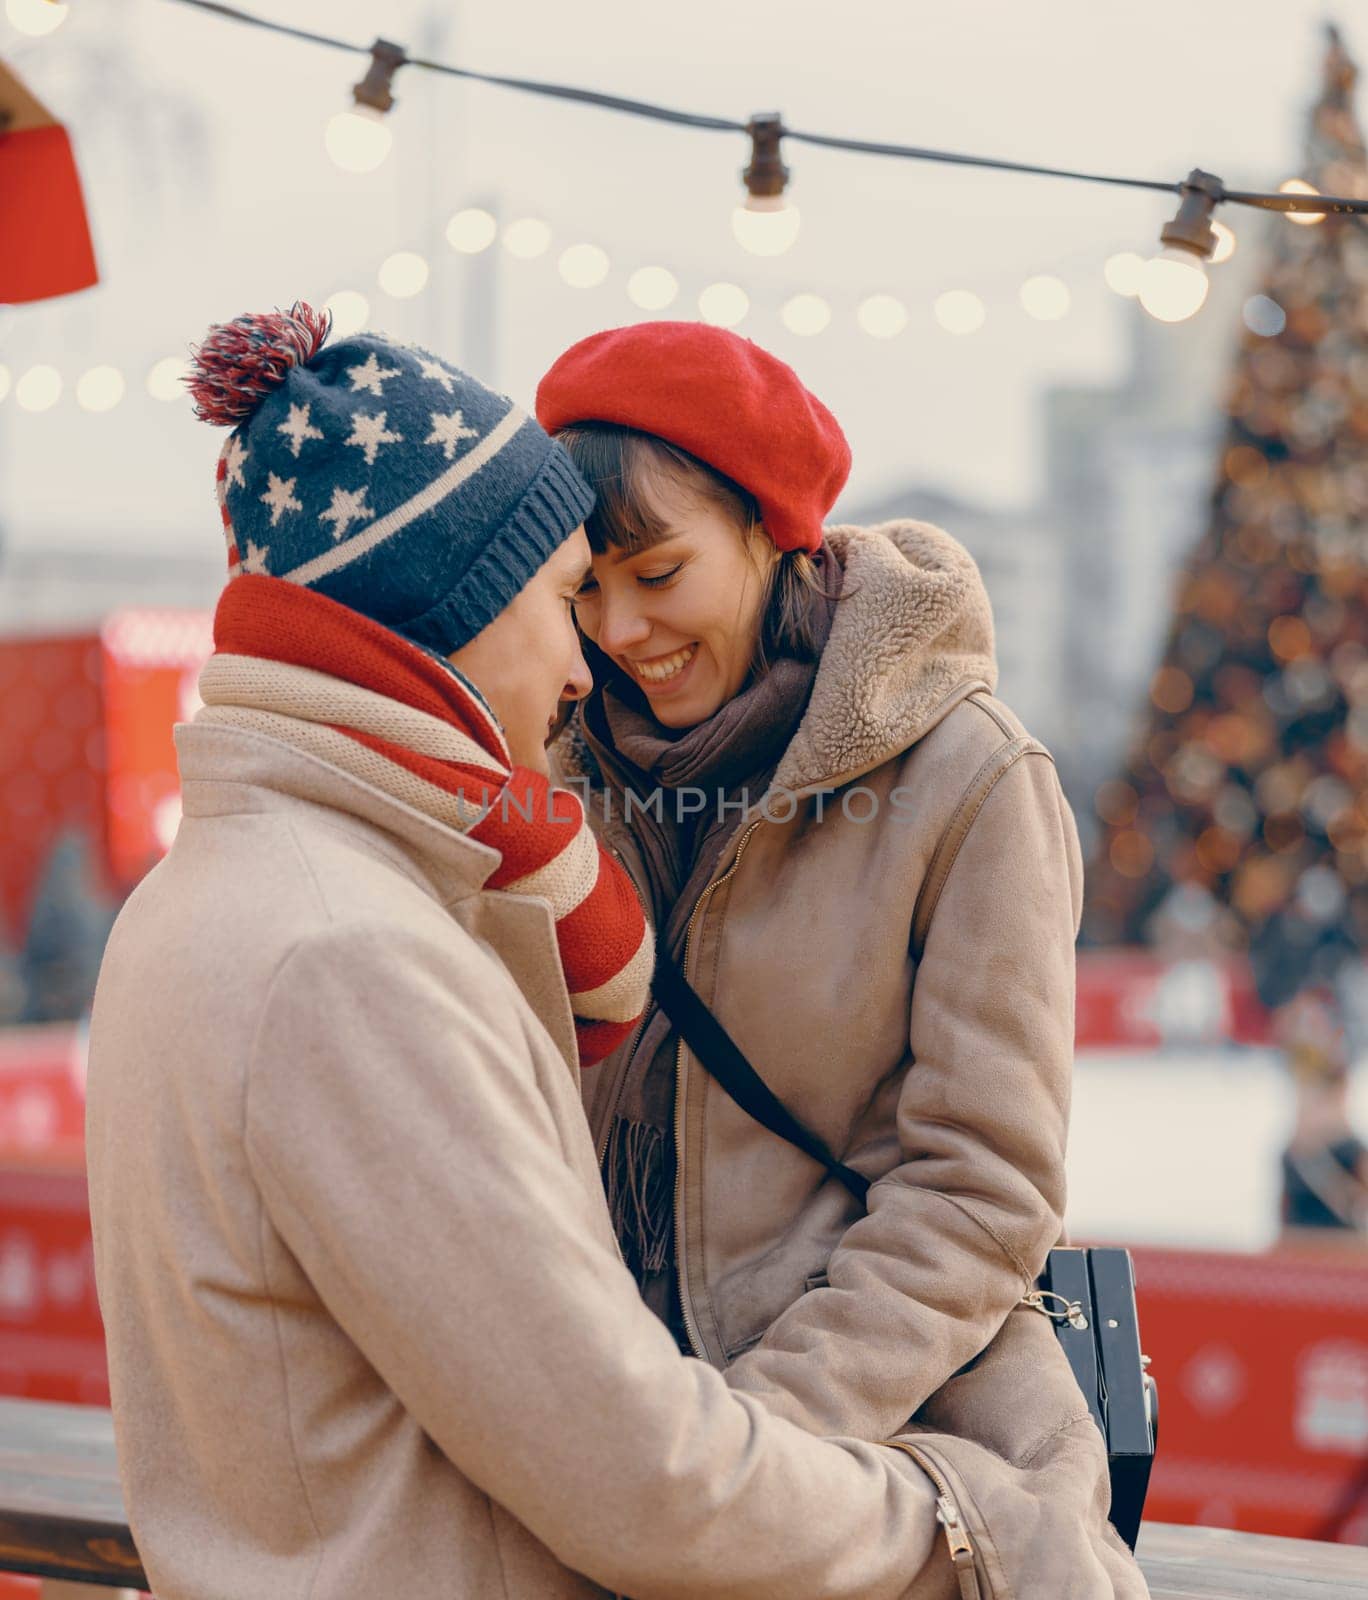 Intimate winter moment as a couple shares a tender kiss on a festive evening by Yaroslav_astakhov